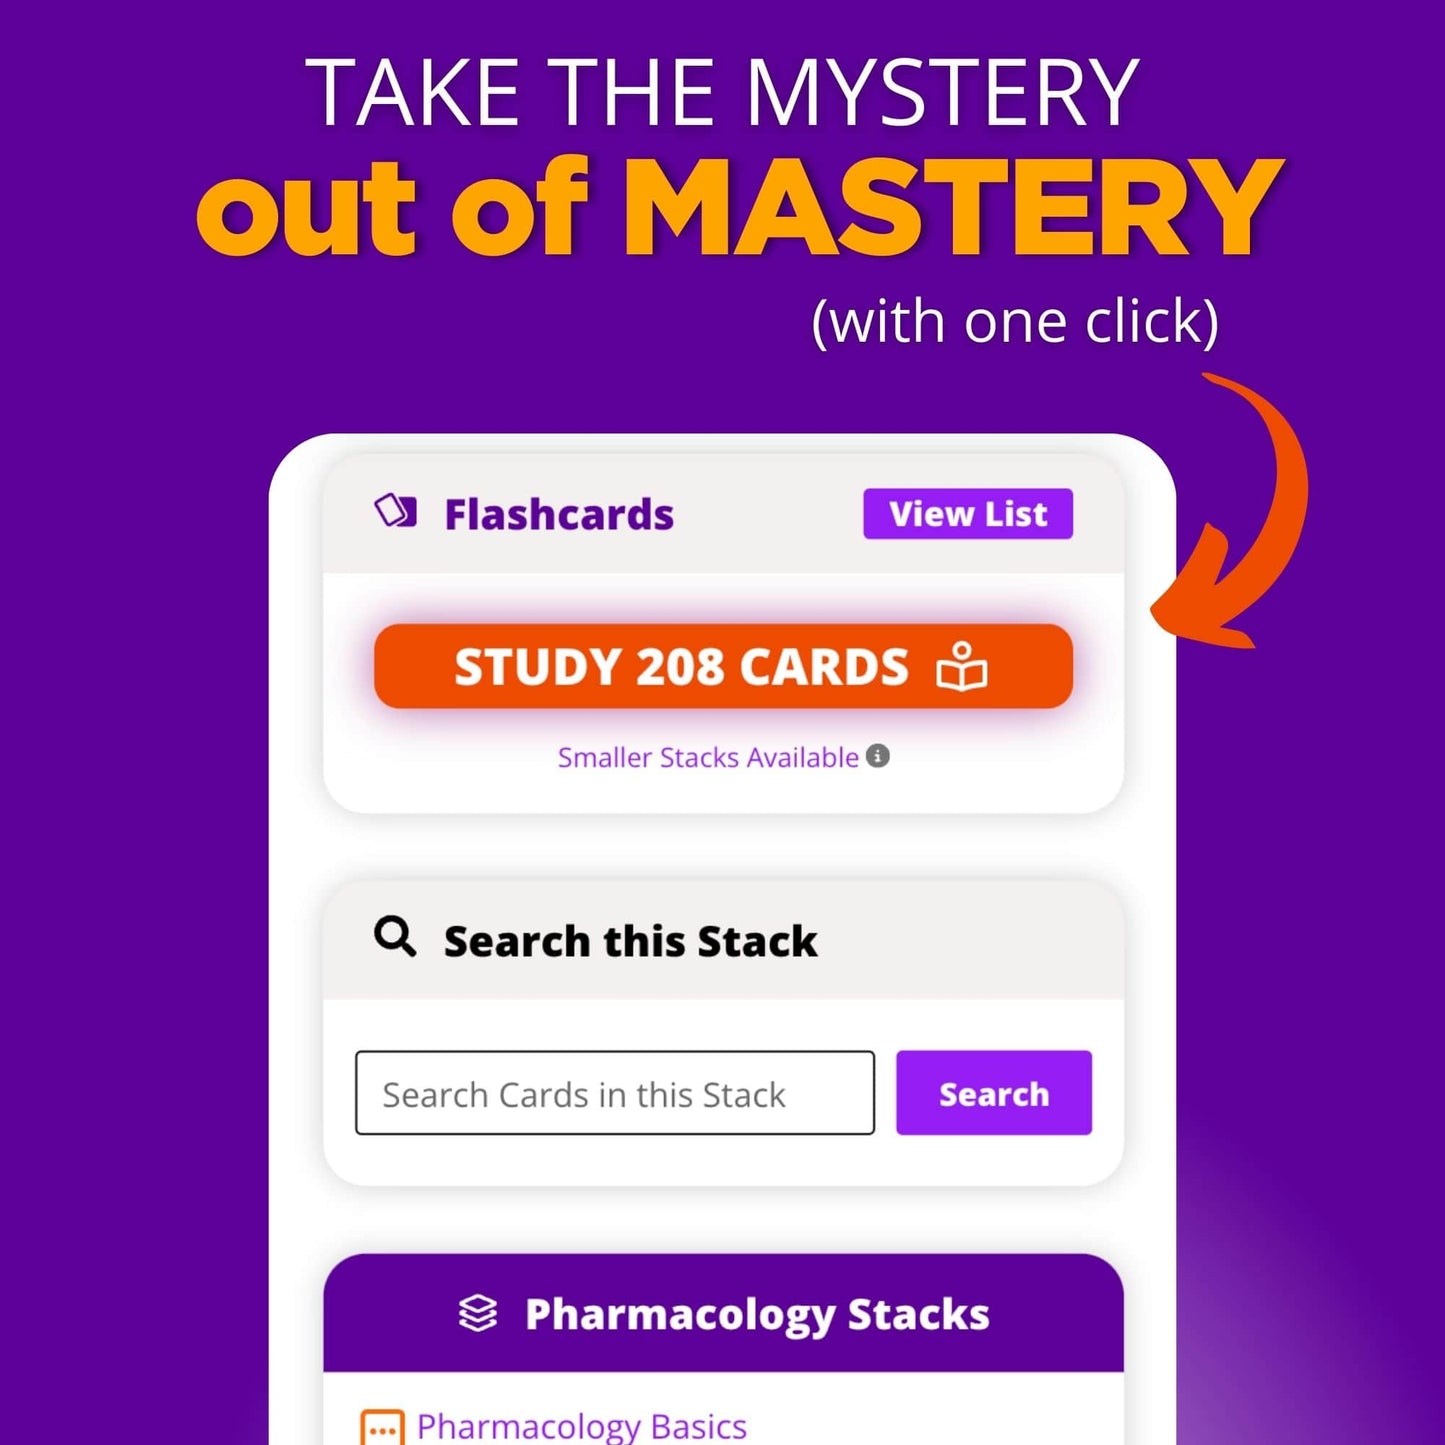 Take the mystery out of mastery (with one click)